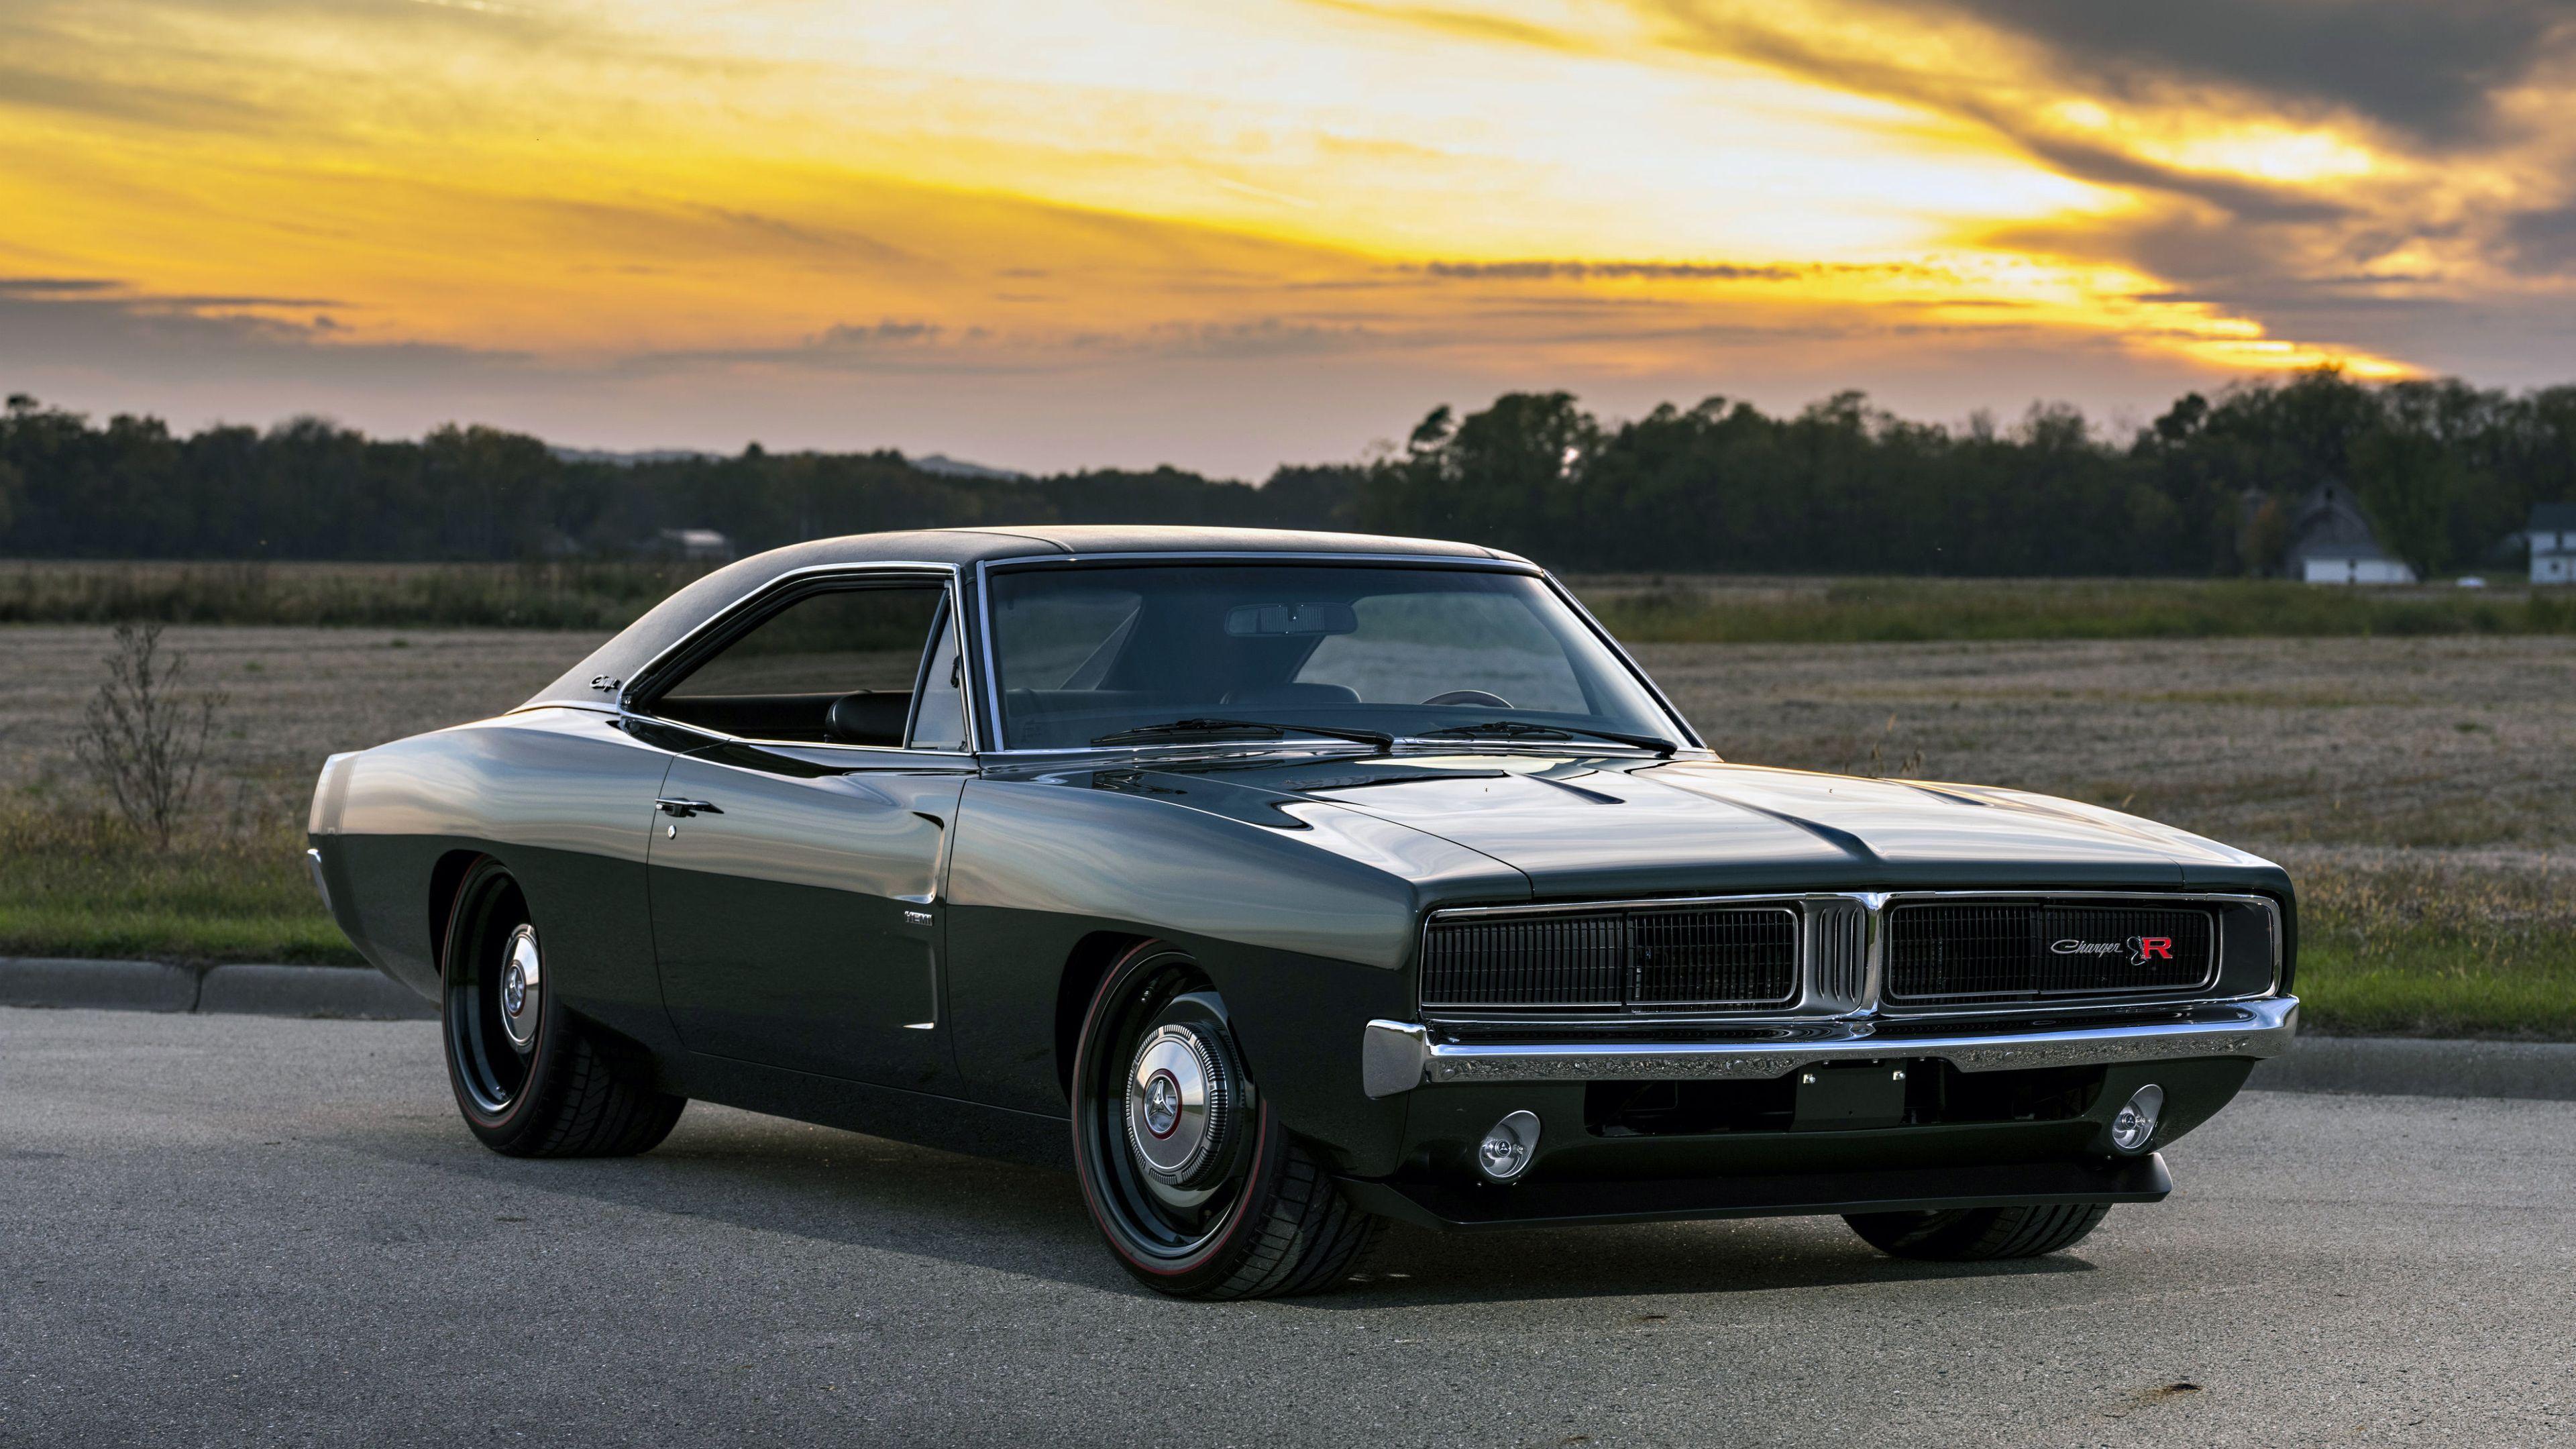 1969 Dodge Charger HD Wallpapers and Backgrounds